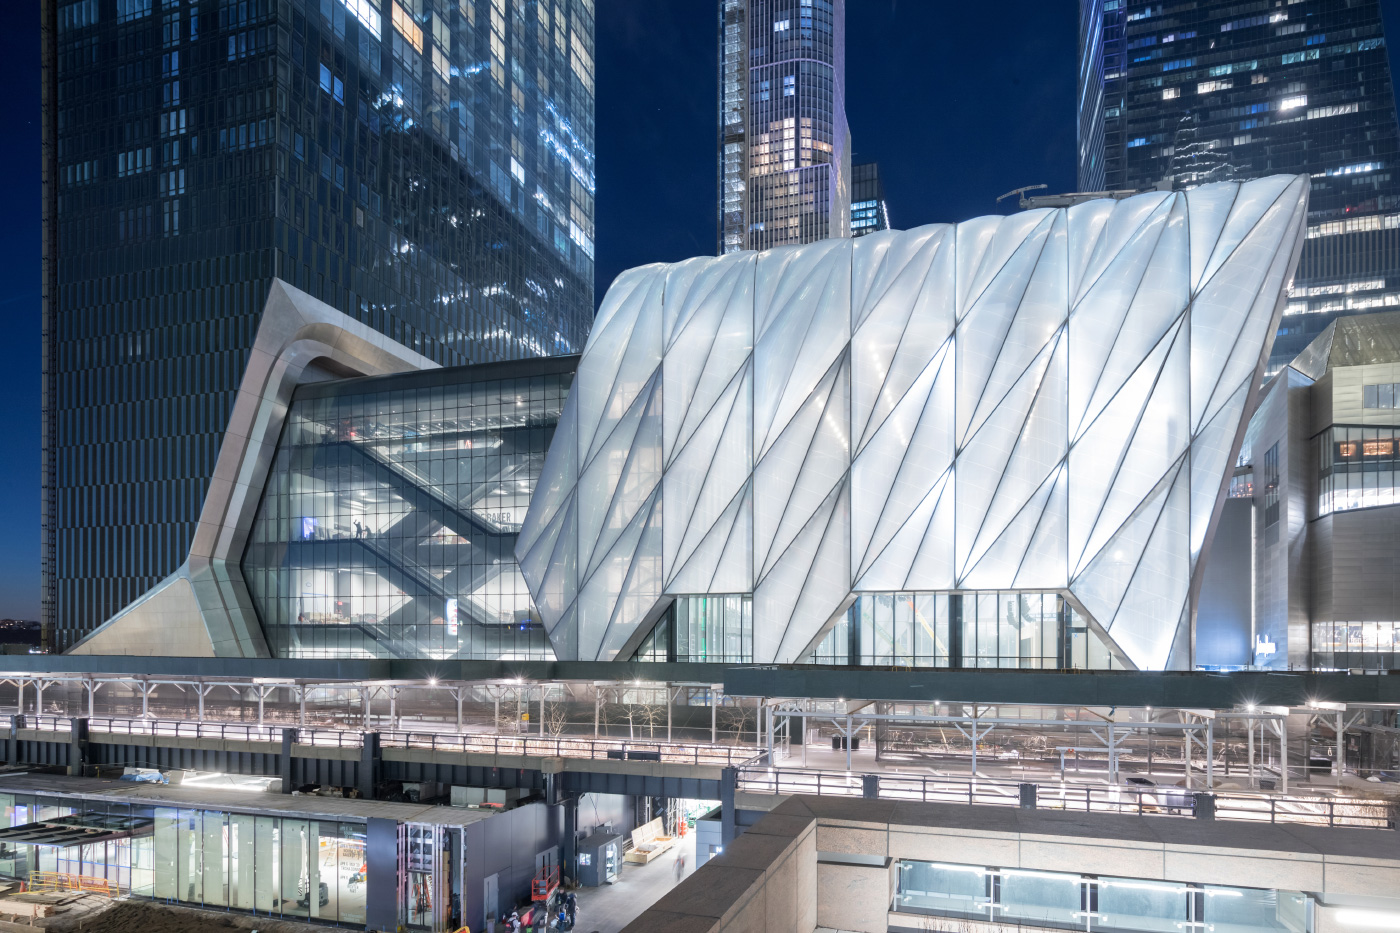 Photo of the Shed, designed by Rockwell Group and Diller Scofidio + Renfro